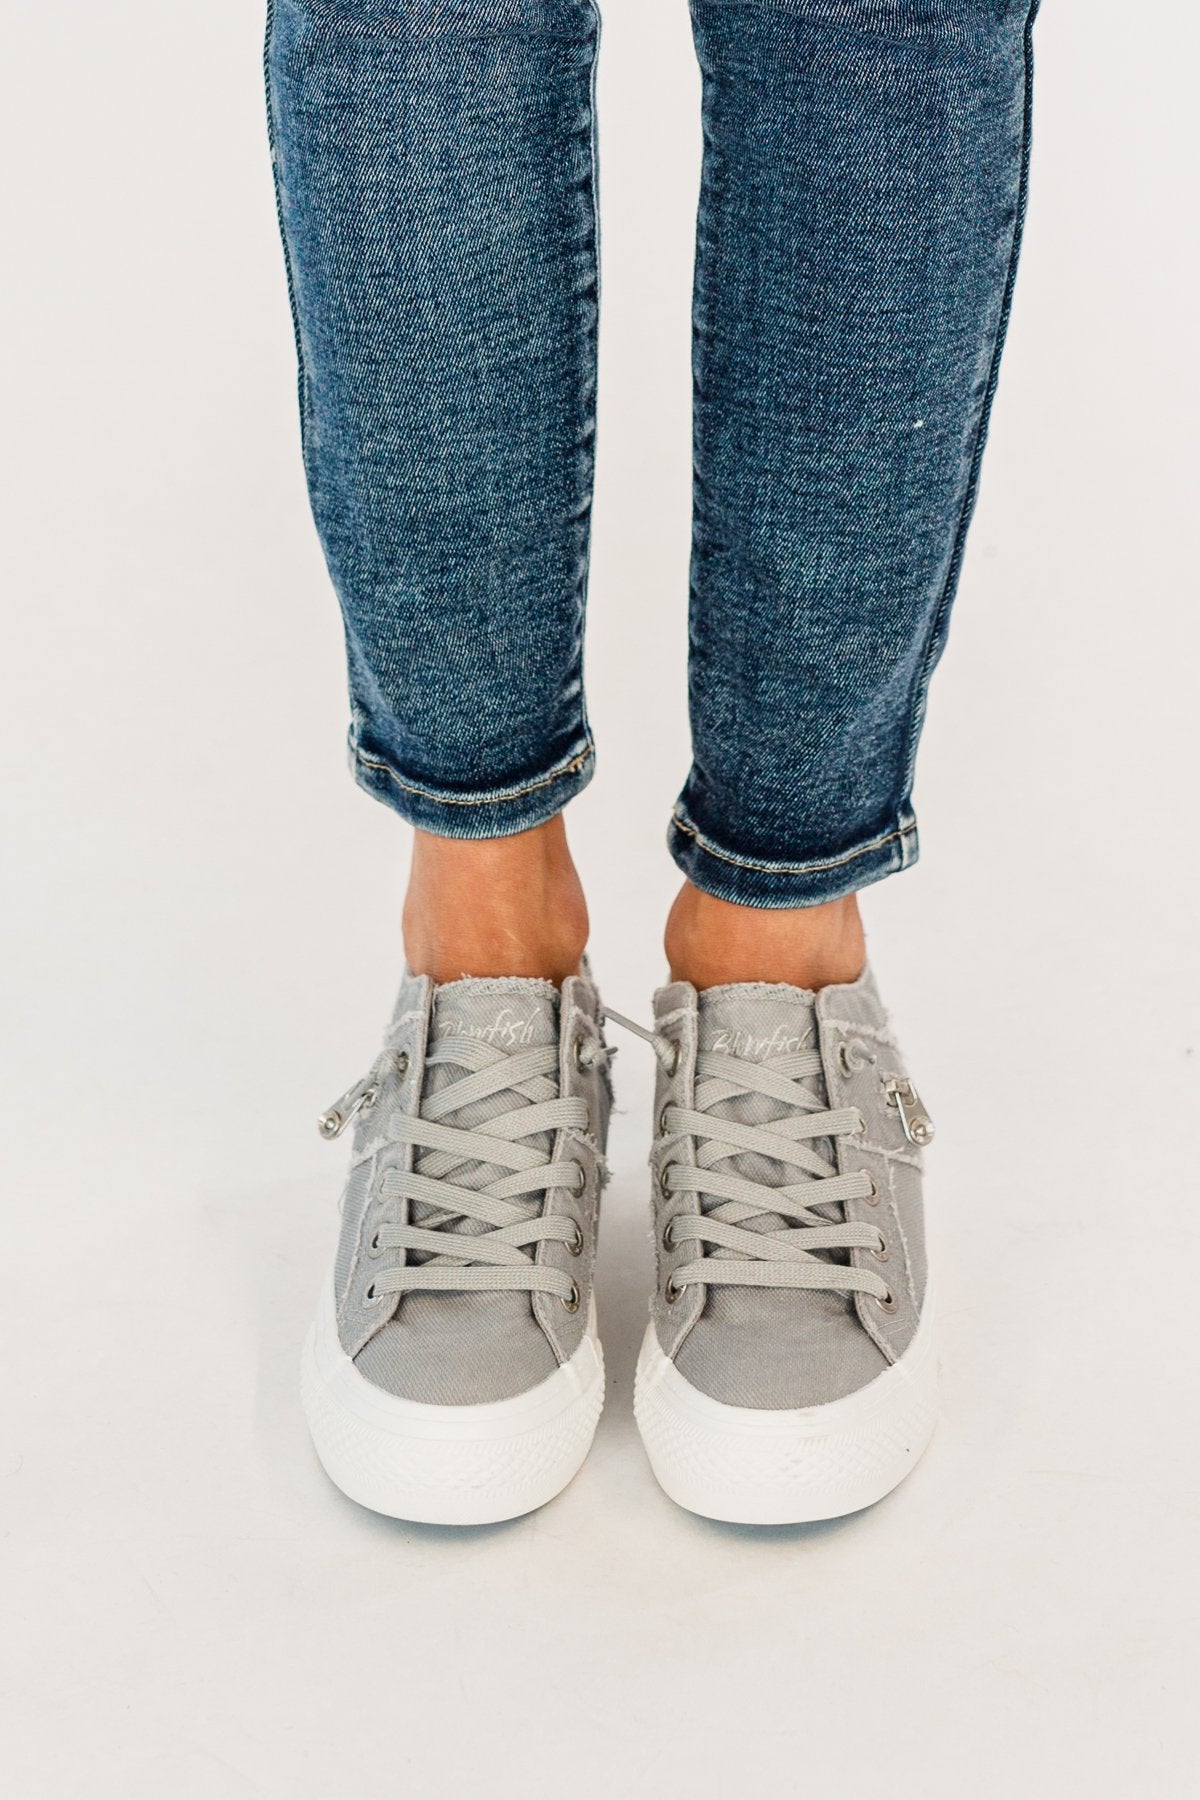 Blowfish Melondrop Sneakers- Sweet Gray – The Pulse Boutique